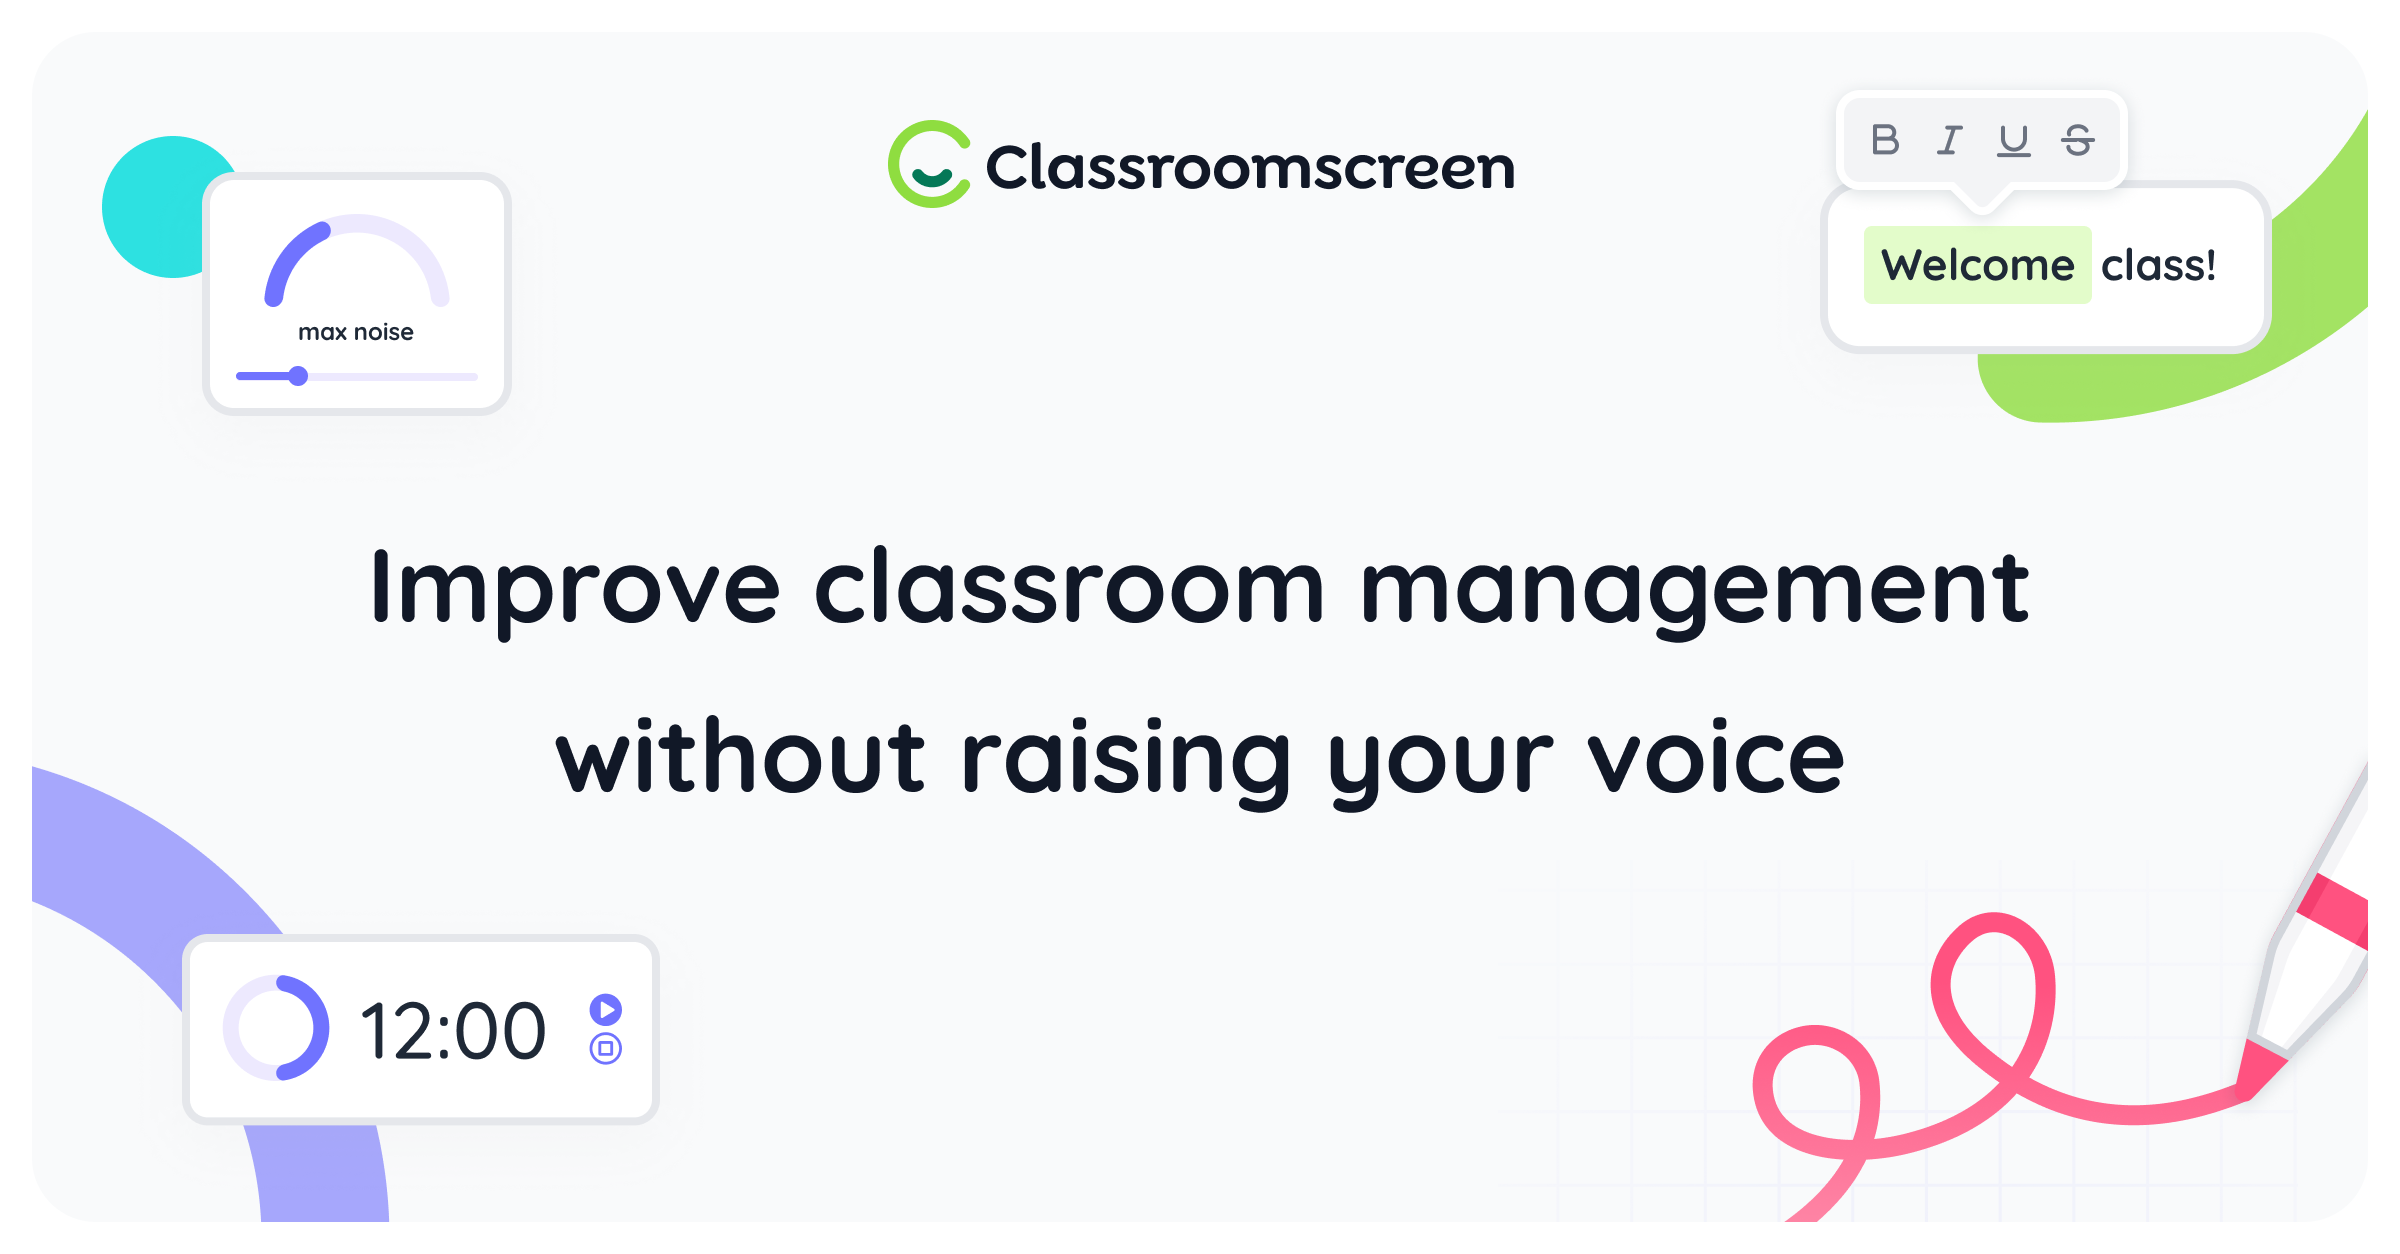 Classroomscreen Reviews 2023: Details, Pricing, & Features